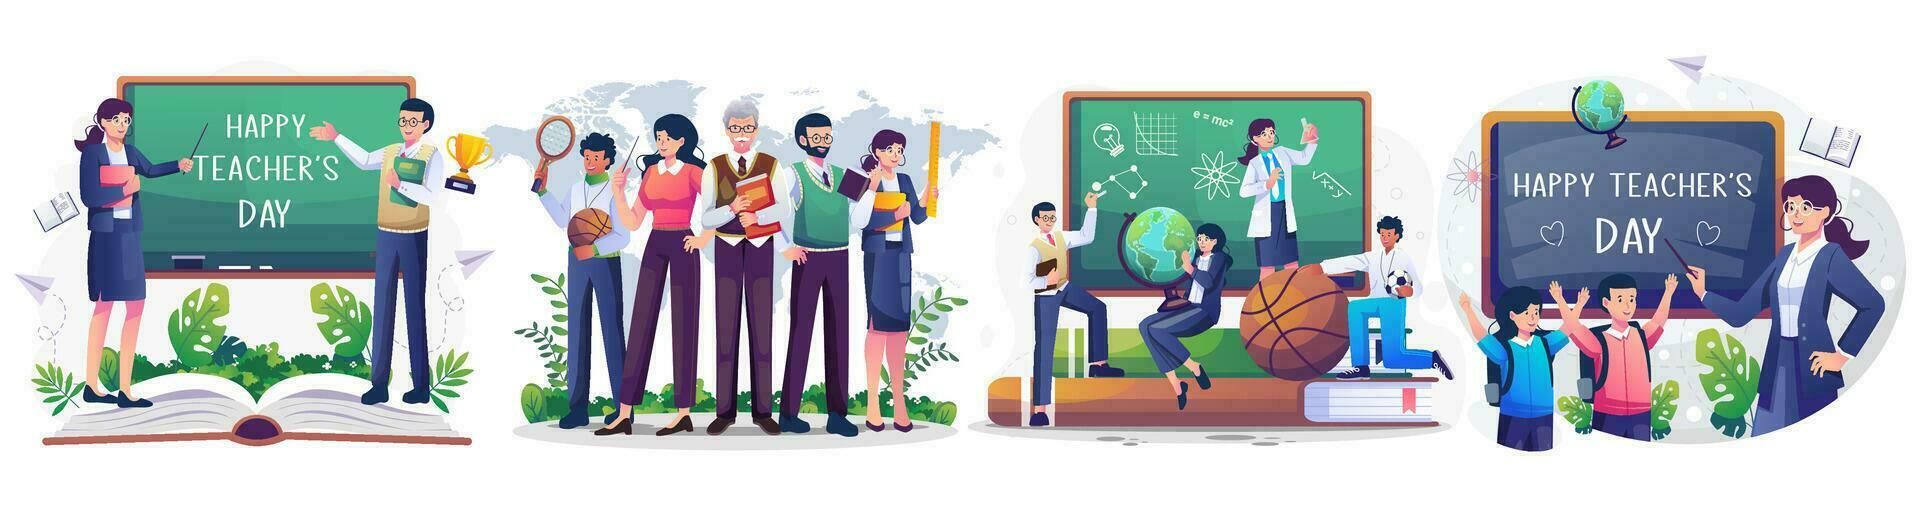 Set of Teacher's Day with A group of teachers from various subjects illustration vector